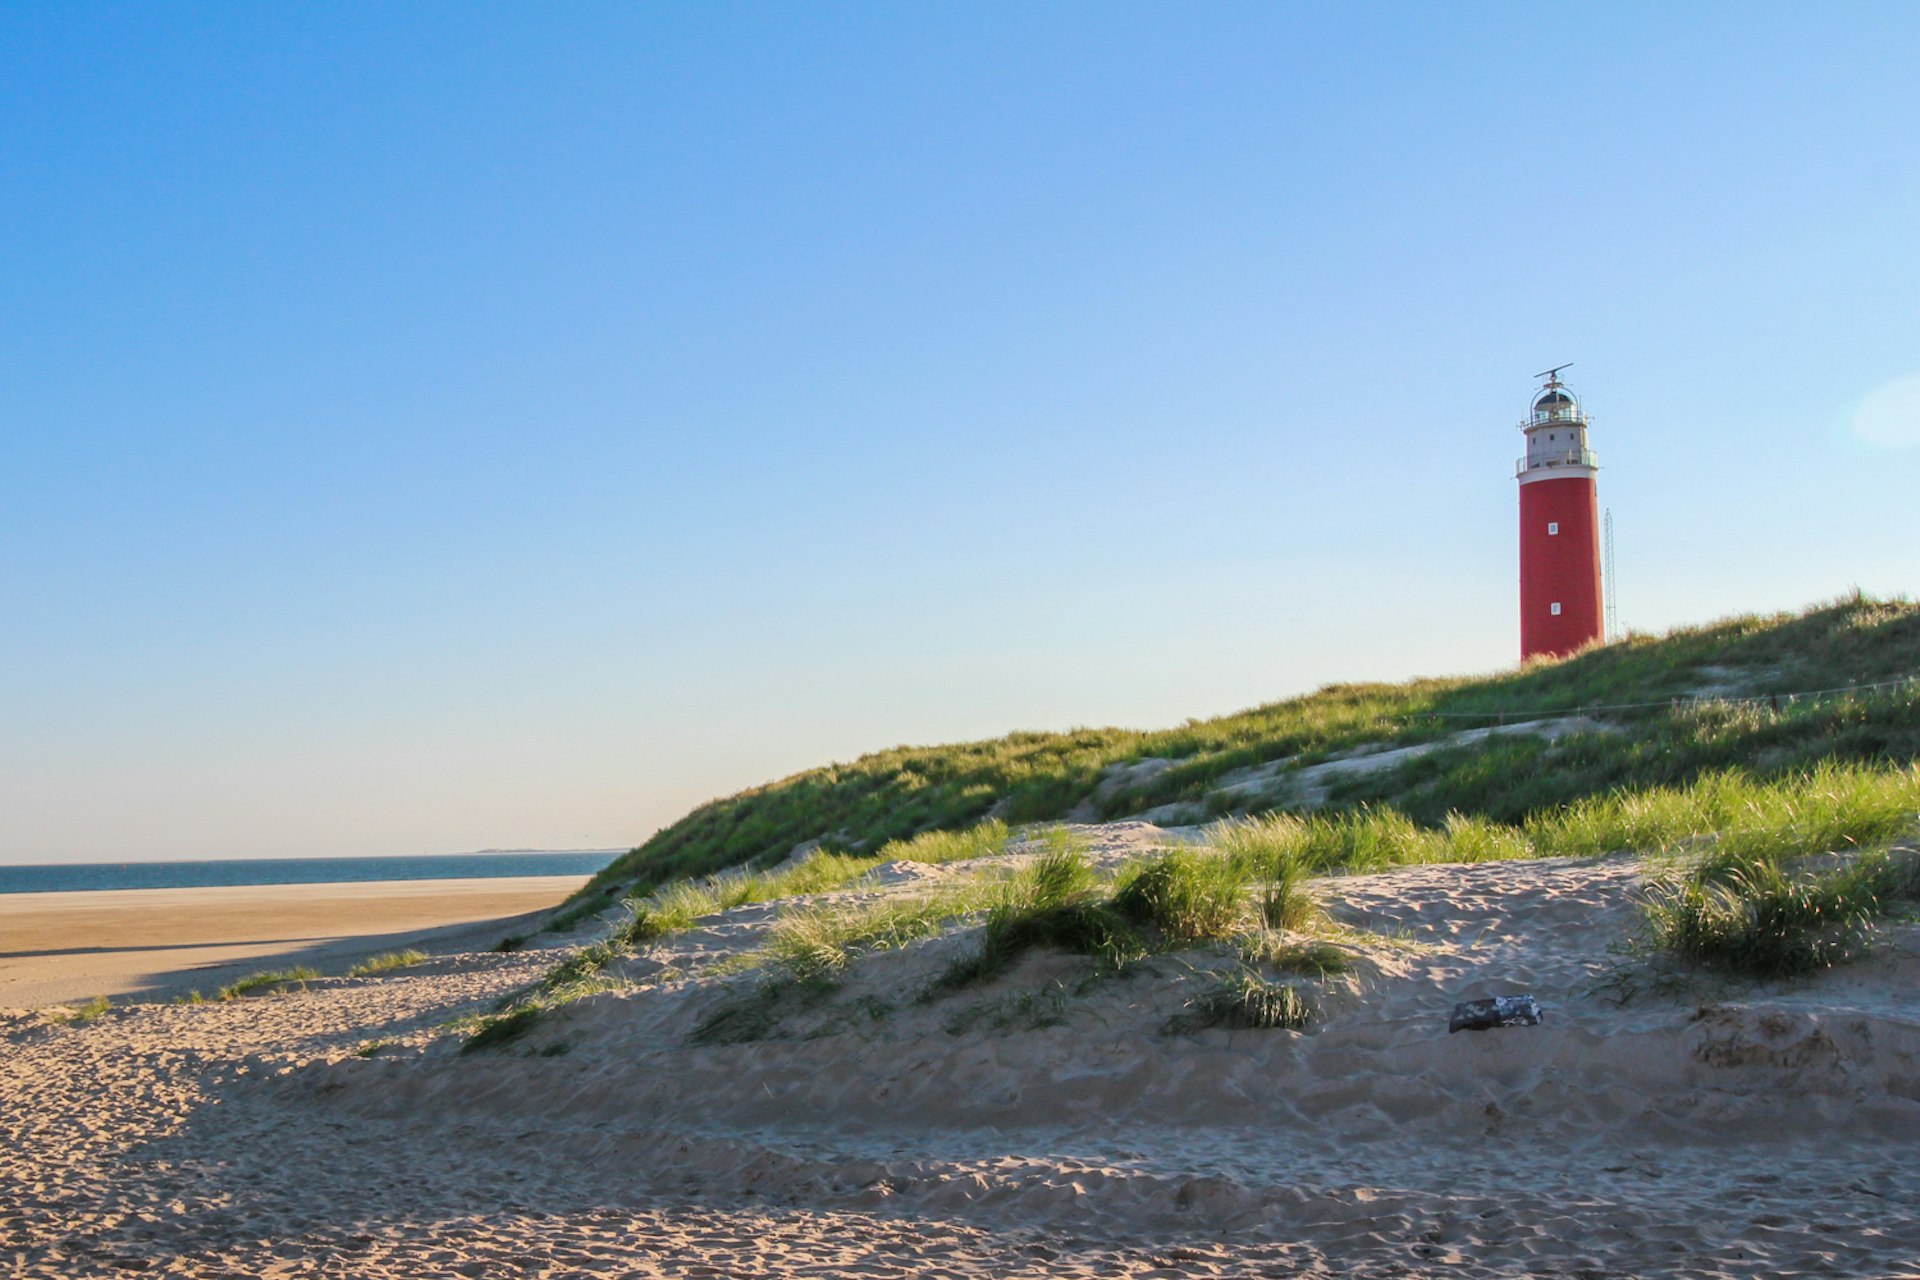 The Eierland Lighthouse on the northernmost tip of Texel © Catherine Le Nevez / Lonely Planet